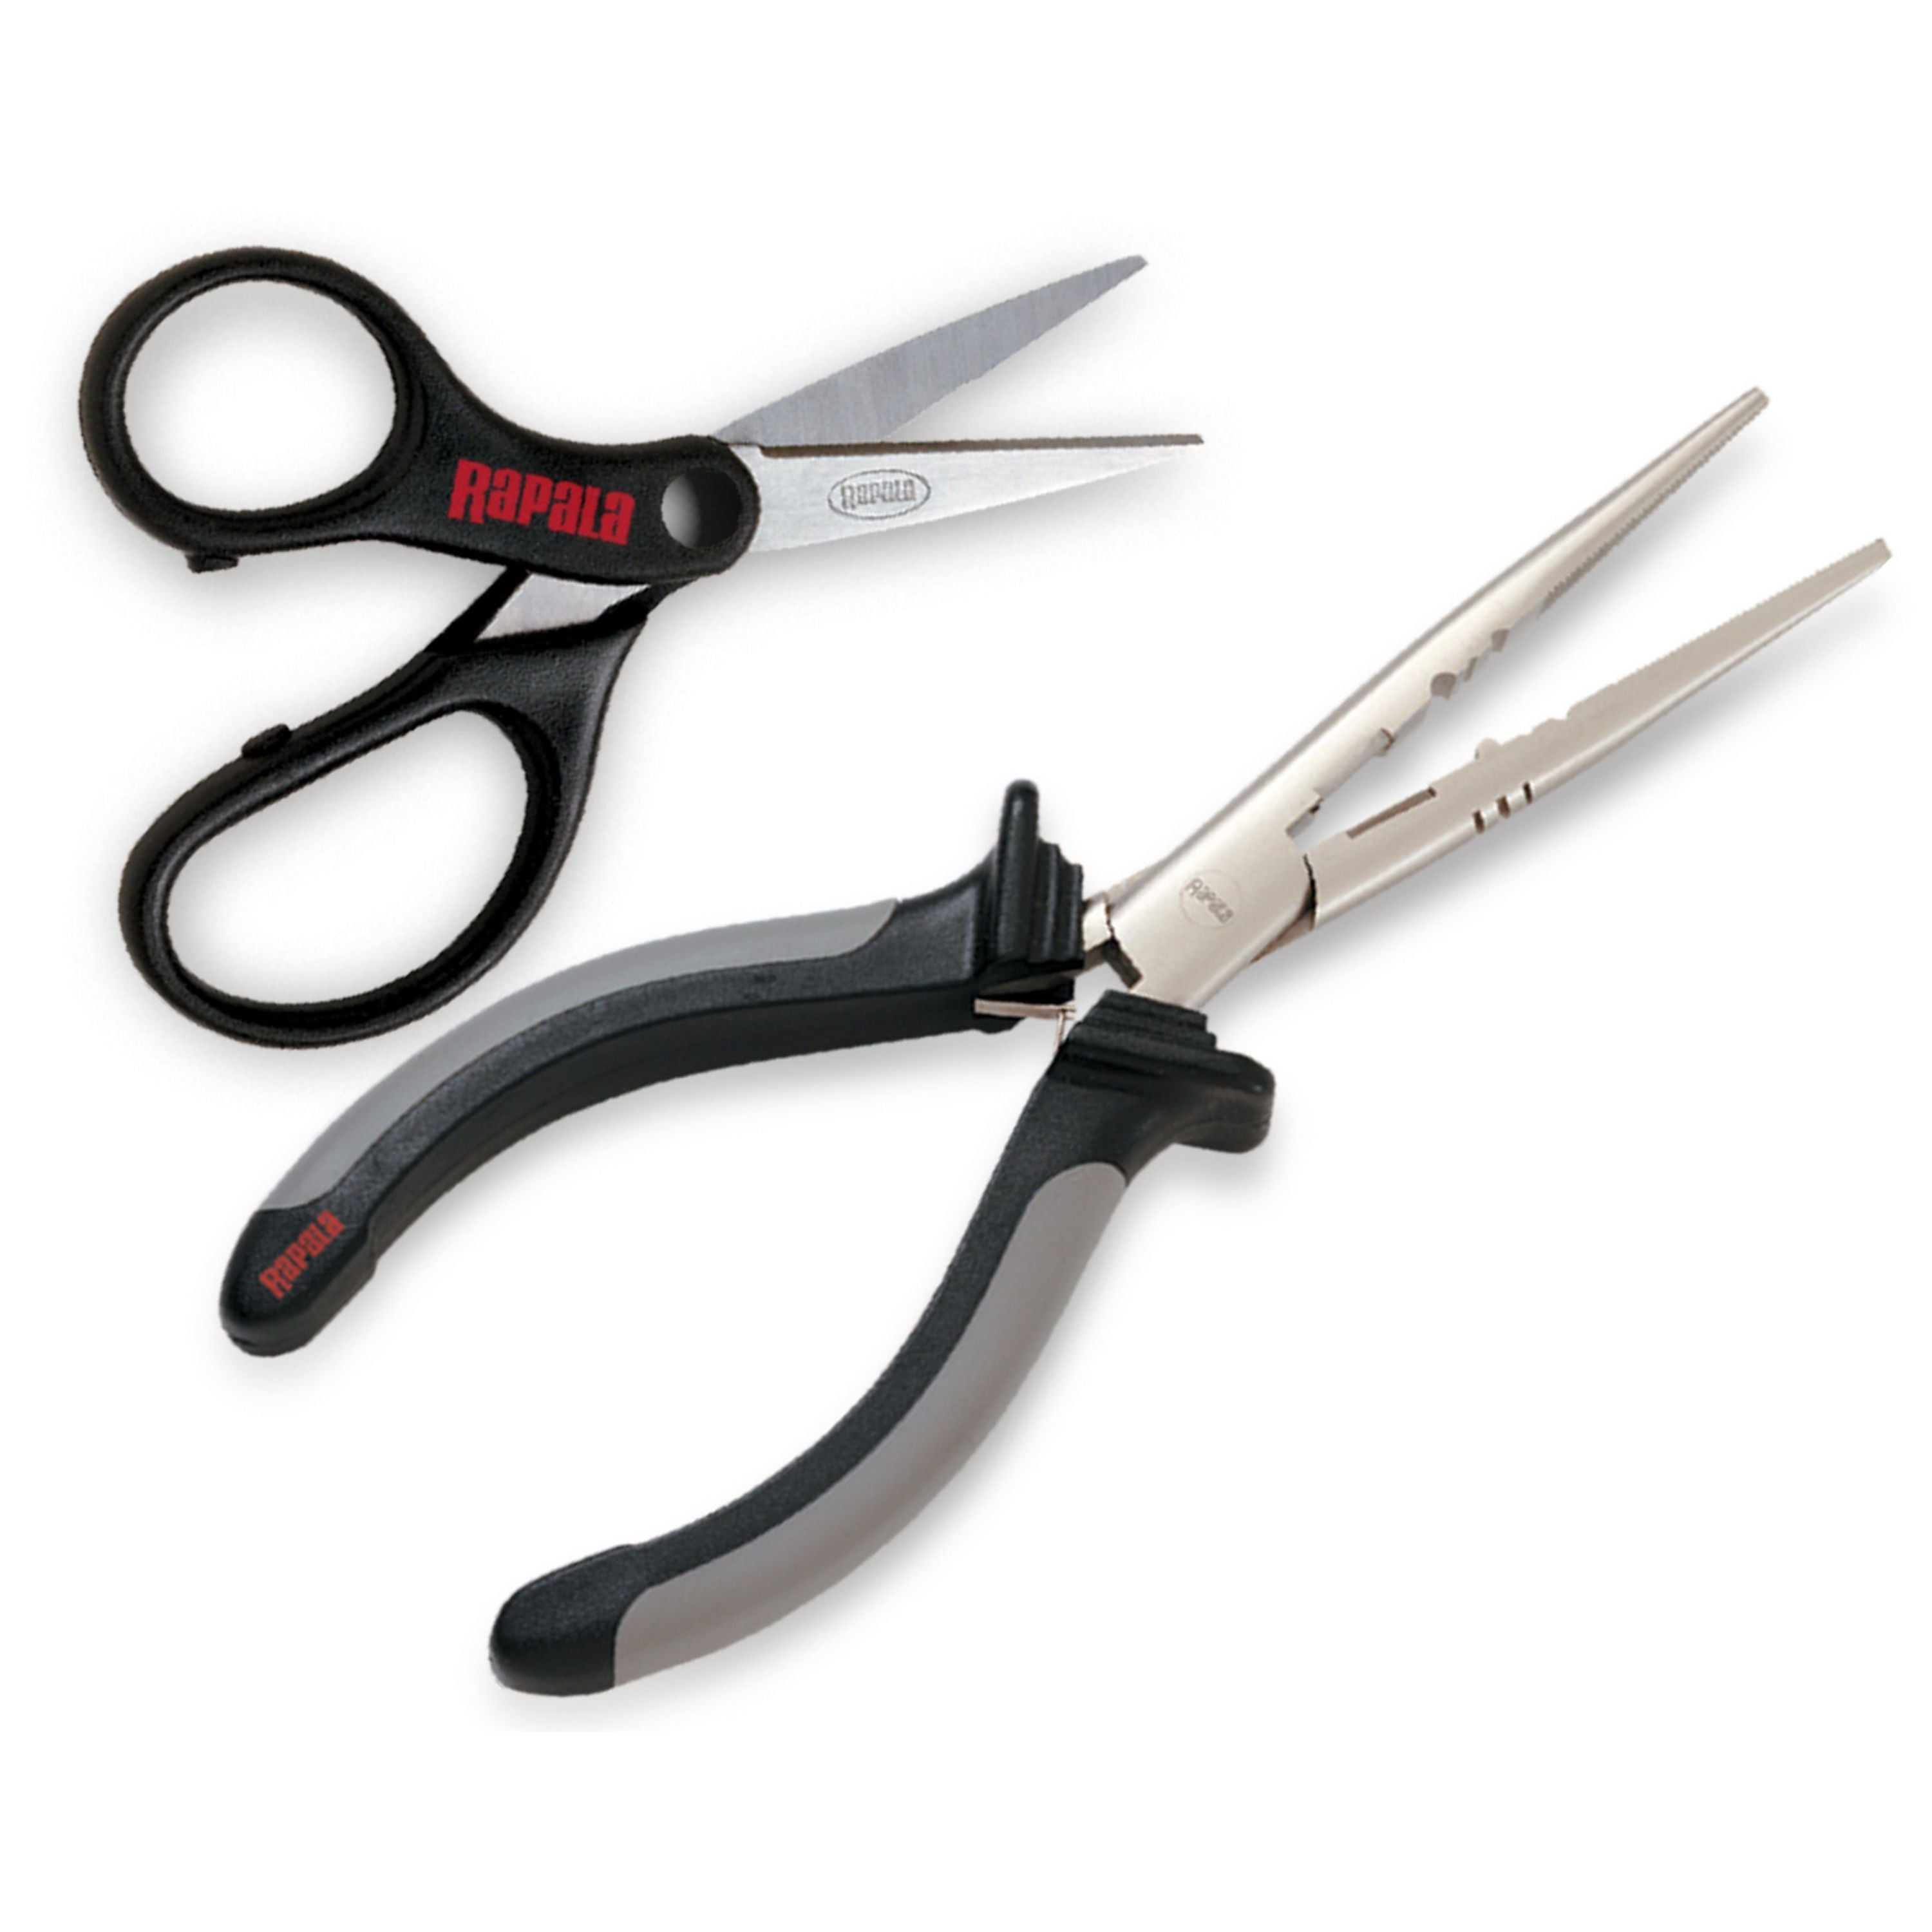 "Rapala" pliers and scissors combo